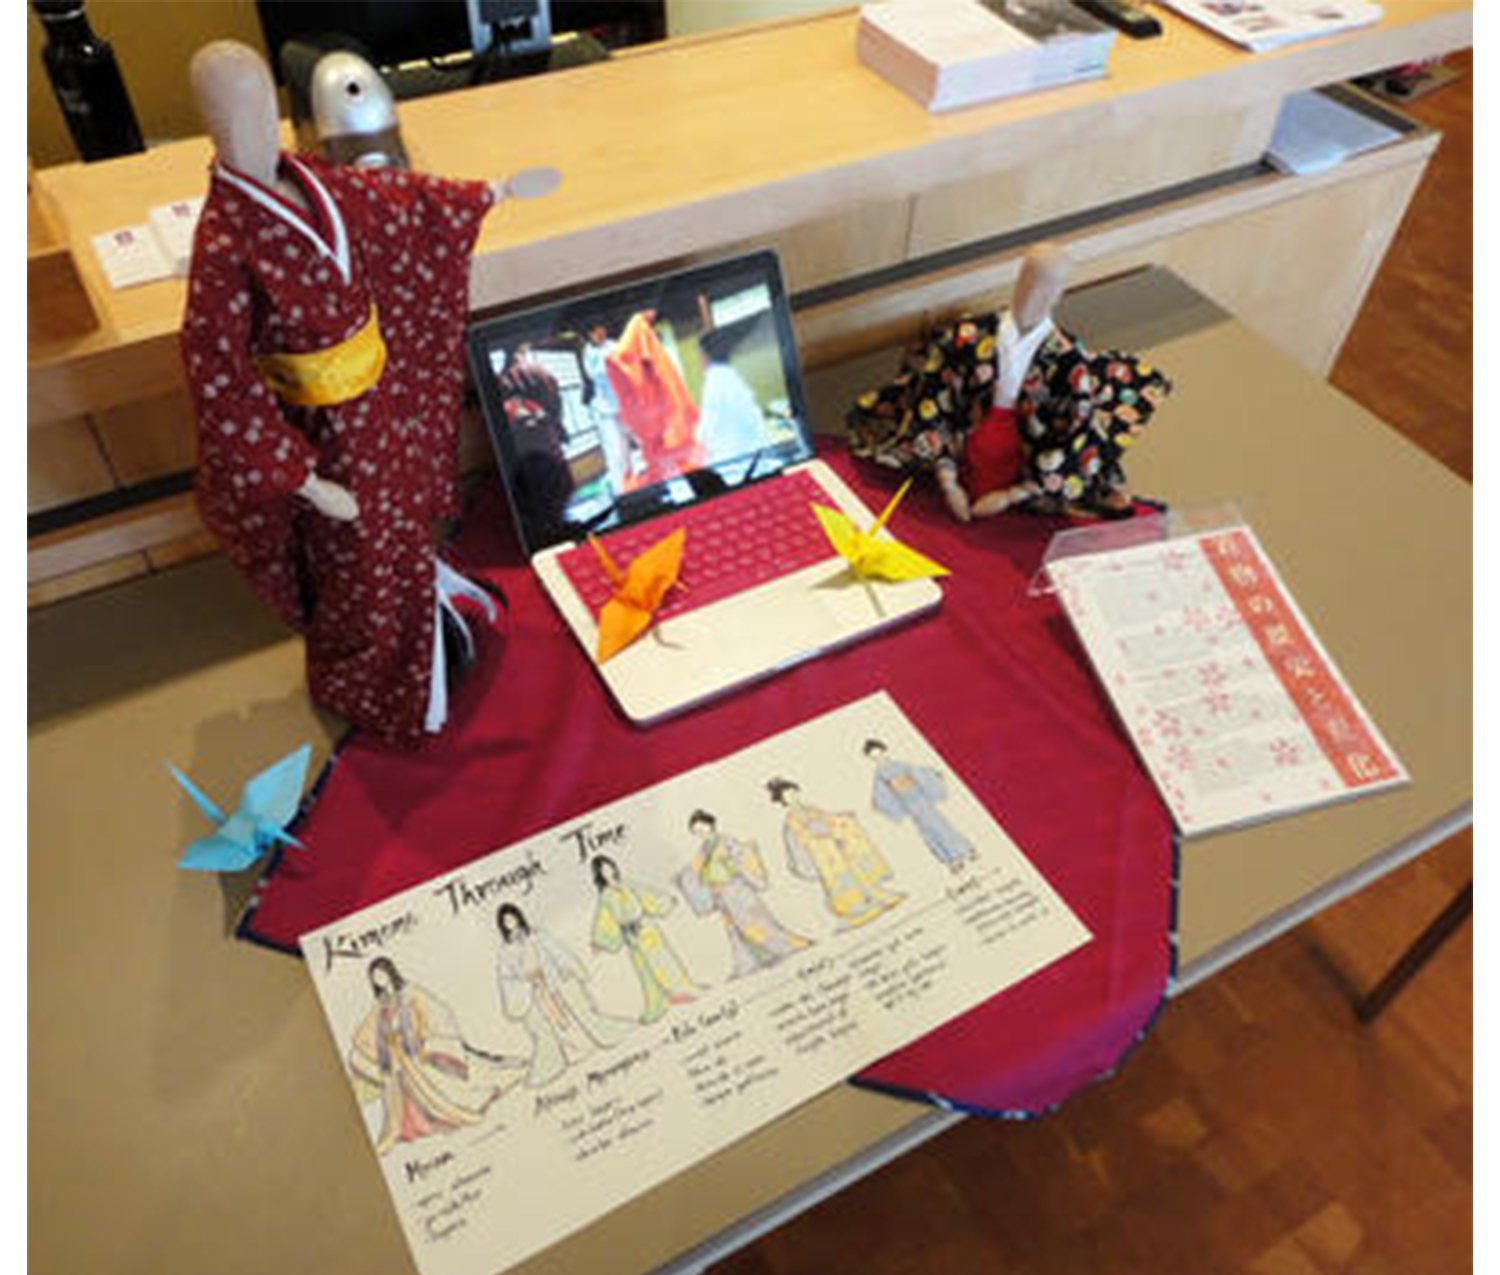 table with a drawing on it, "Kimonos Through Time" written on it with drawings of women wearing kimonos below. also on the table are paper cranes, a laptop with its screen propped up, and two small mannequins wearing kimonos